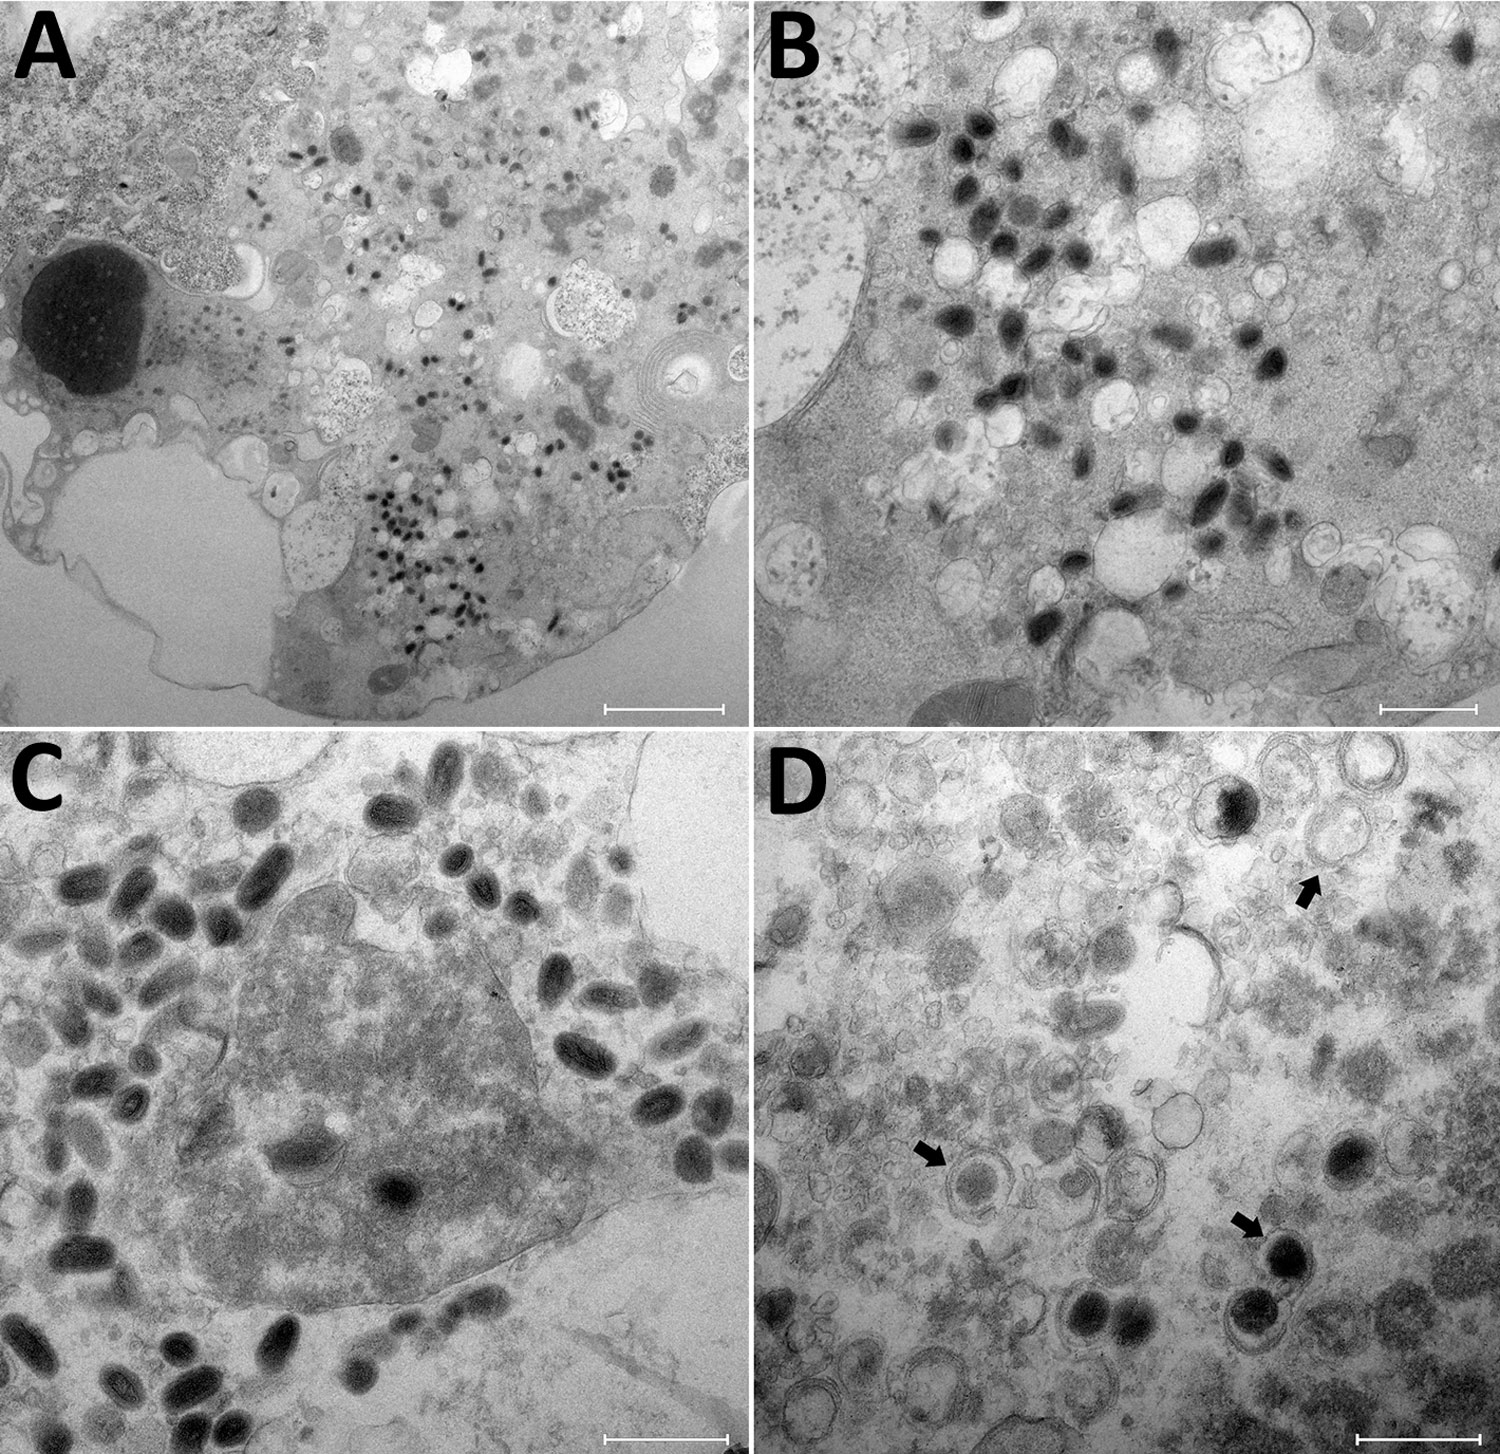 Transmission electron microscopy of OAT3.T cells infected with orf virus IHUMI-1 from a 65-year-old woman in France. A) Ultrathin section of an OAT3.Ts cell at 24 h postinfection harboring orf virus strain IHUMI-1 undergoing its replicative cycle where dense inclusion bodies could be clearly seen in the cell cytoplasm. B, C) Higher magnifications of infected cells showing typical enveloped virions. D) Ultrathin sections of an OAT3.Ts cell showing enveloped particles (arrows). Scale bars indicate